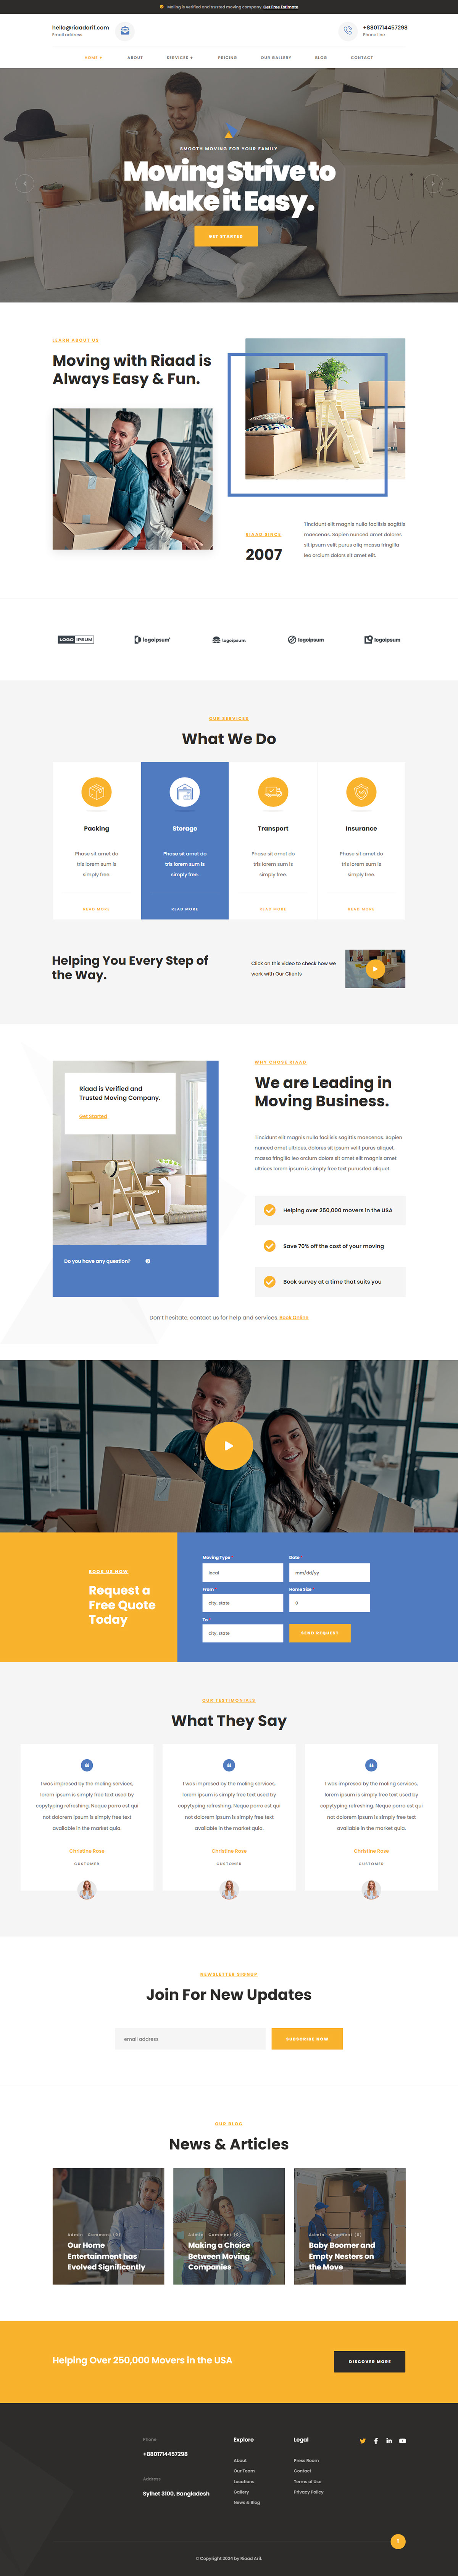 Moving and Storage Business Website rendition image